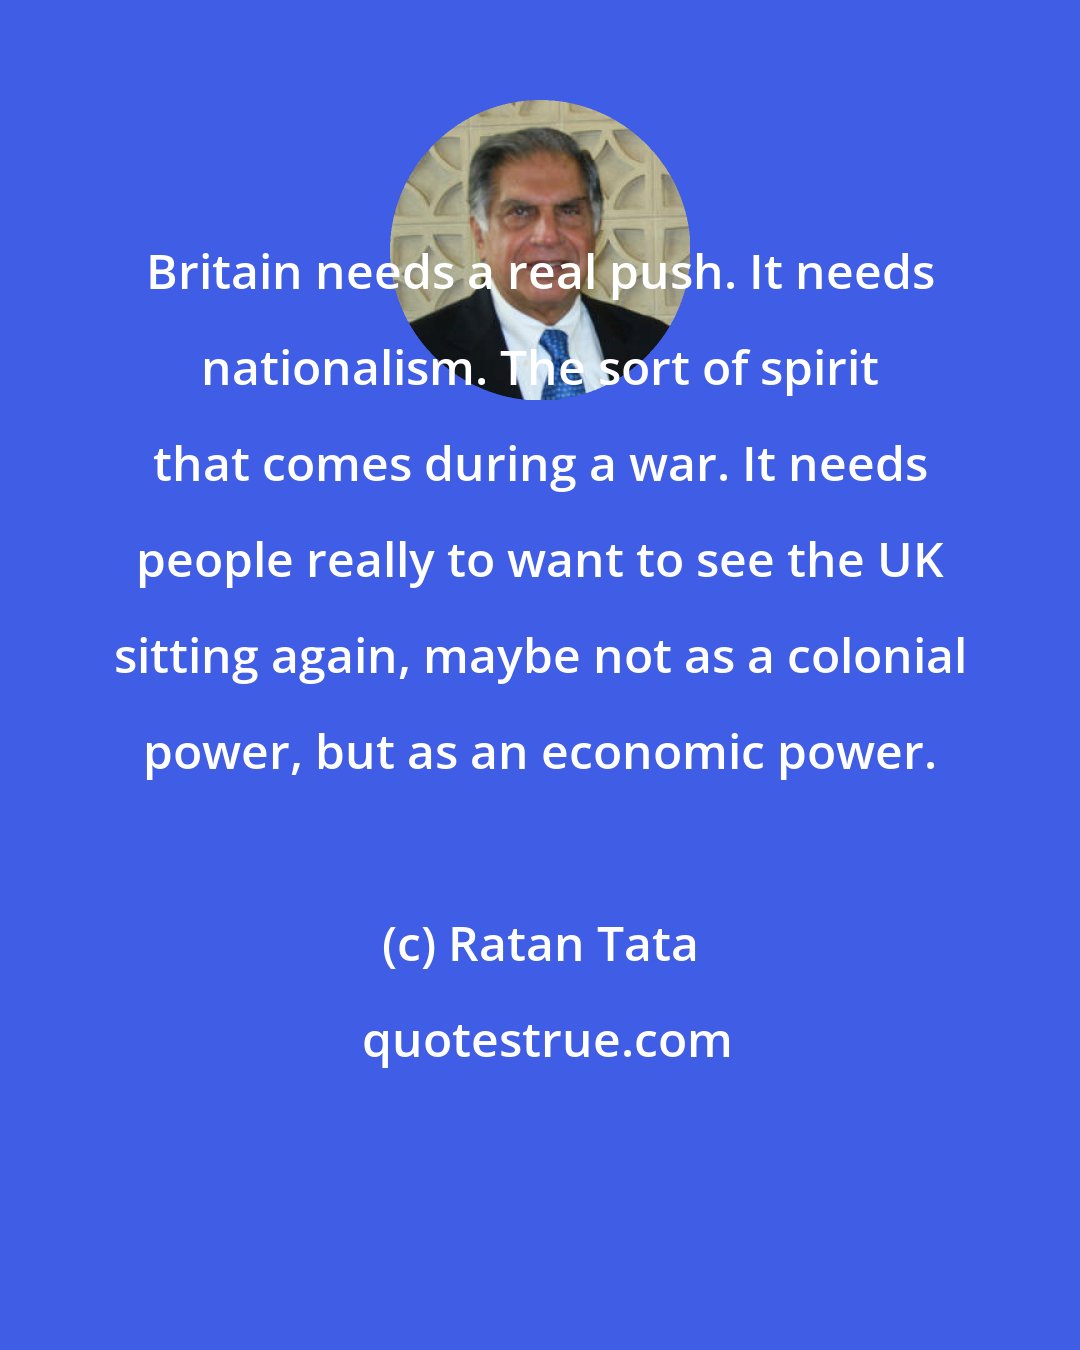 Ratan Tata: Britain needs a real push. It needs nationalism. The sort of spirit that comes during a war. It needs people really to want to see the UK sitting again, maybe not as a colonial power, but as an economic power.